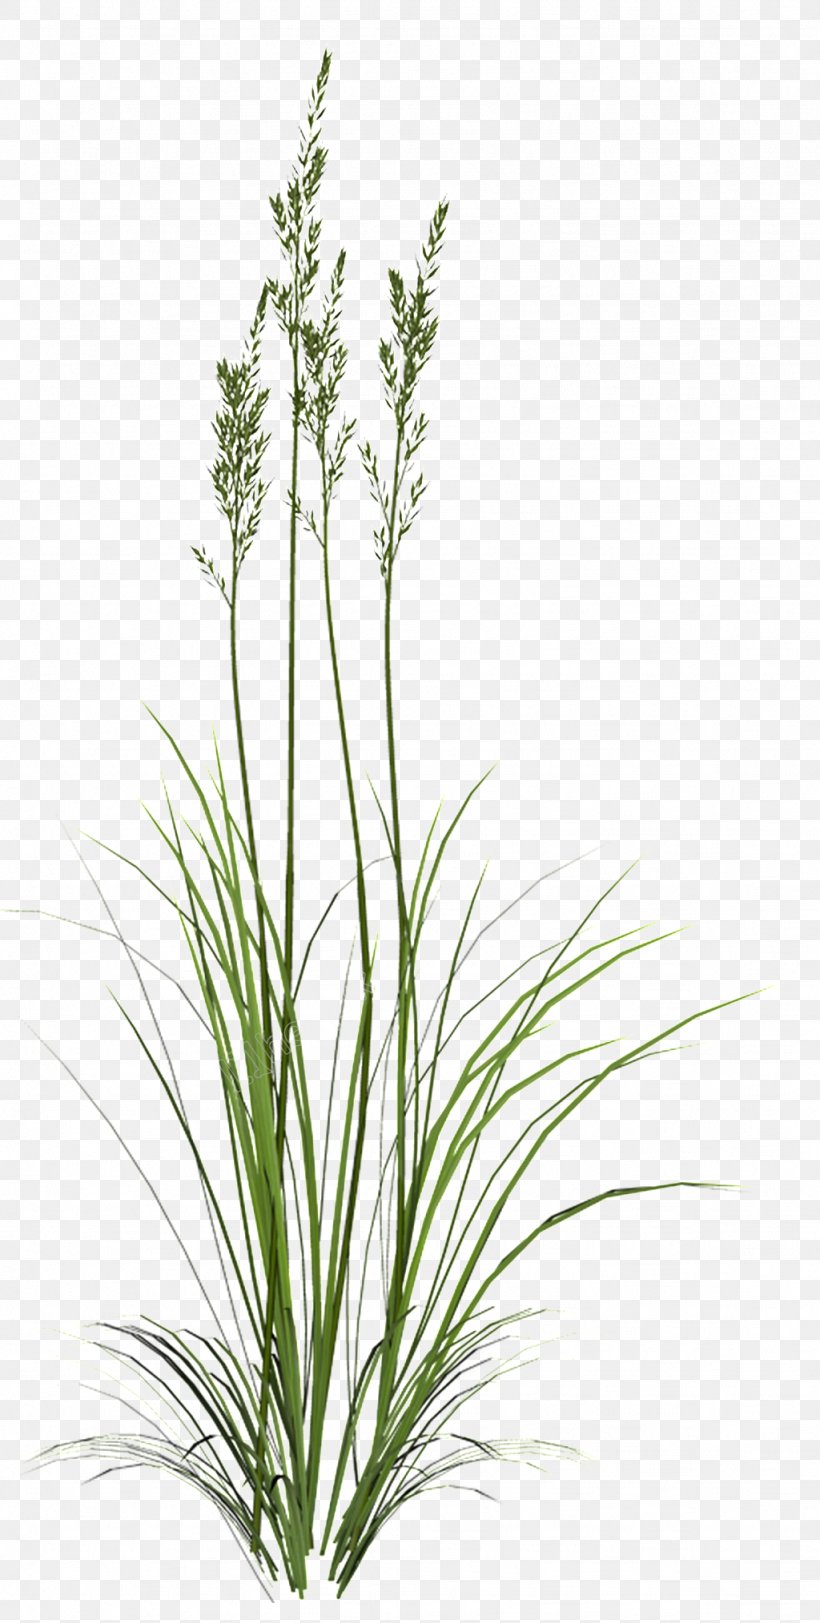 Herbaceous Plant Plants Image 3D Computer Graphics, PNG, 1024x2028px, 3d Computer Graphics, Herbaceous Plant, Arrowgrass, Botany, Computer Graphics Download Free